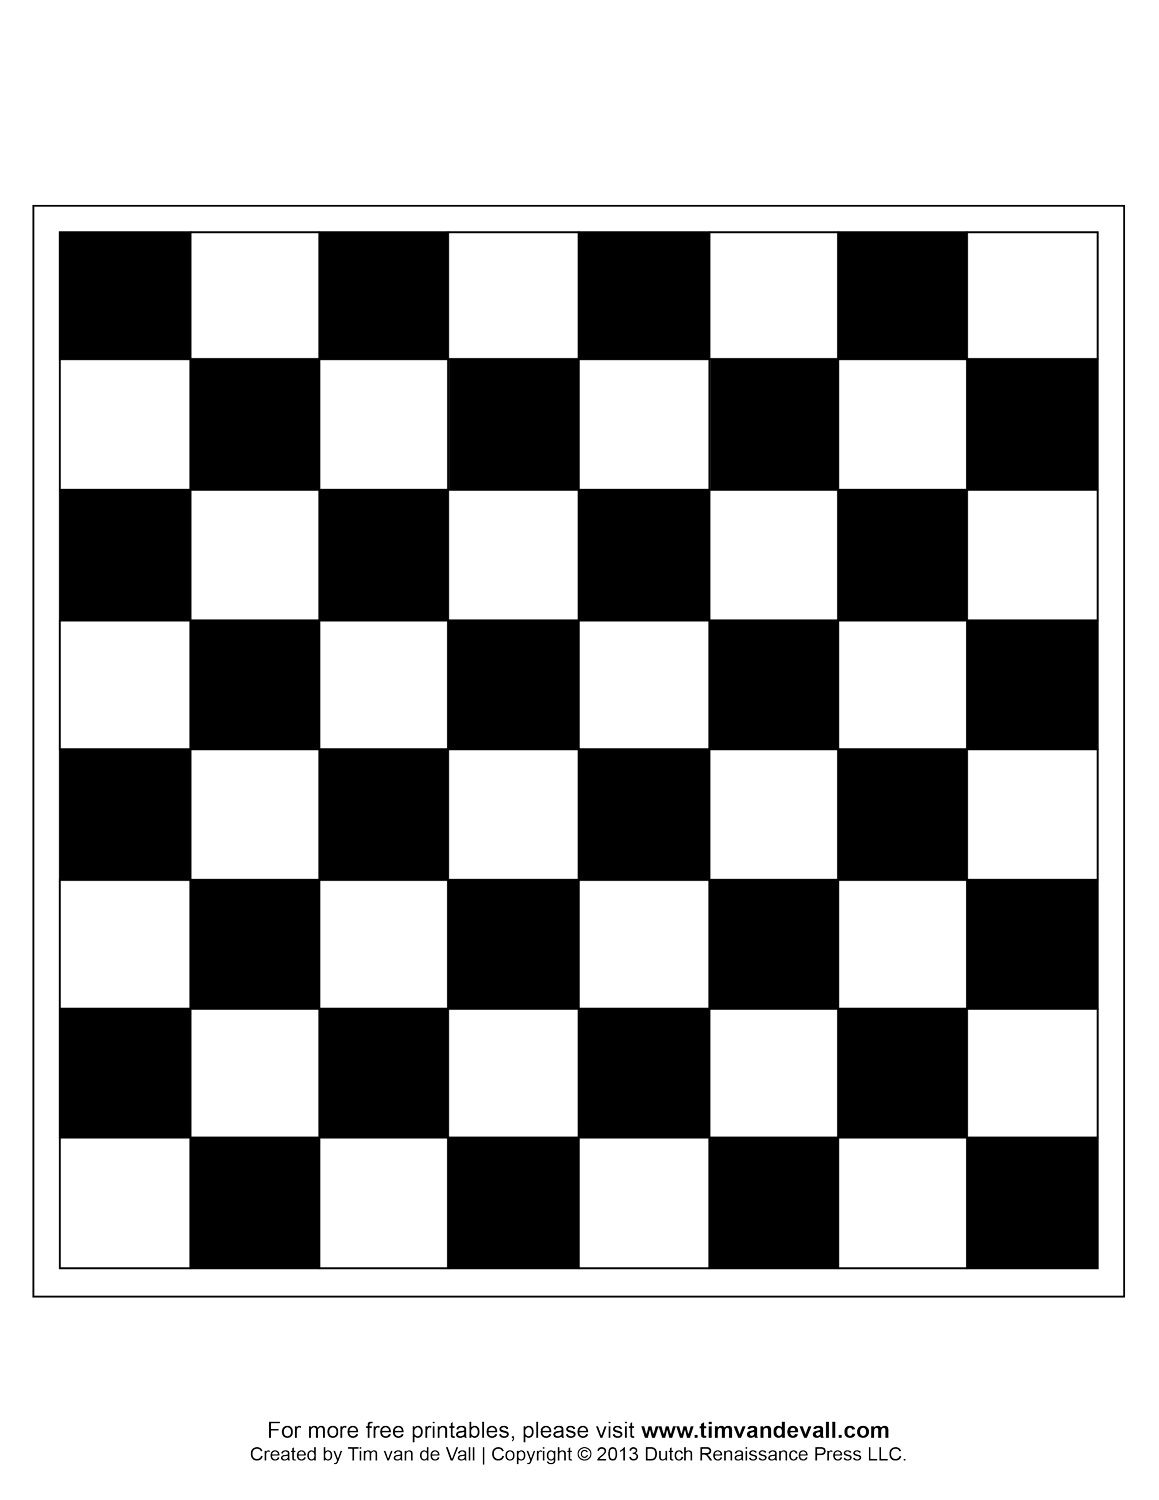 Printable chess boards.